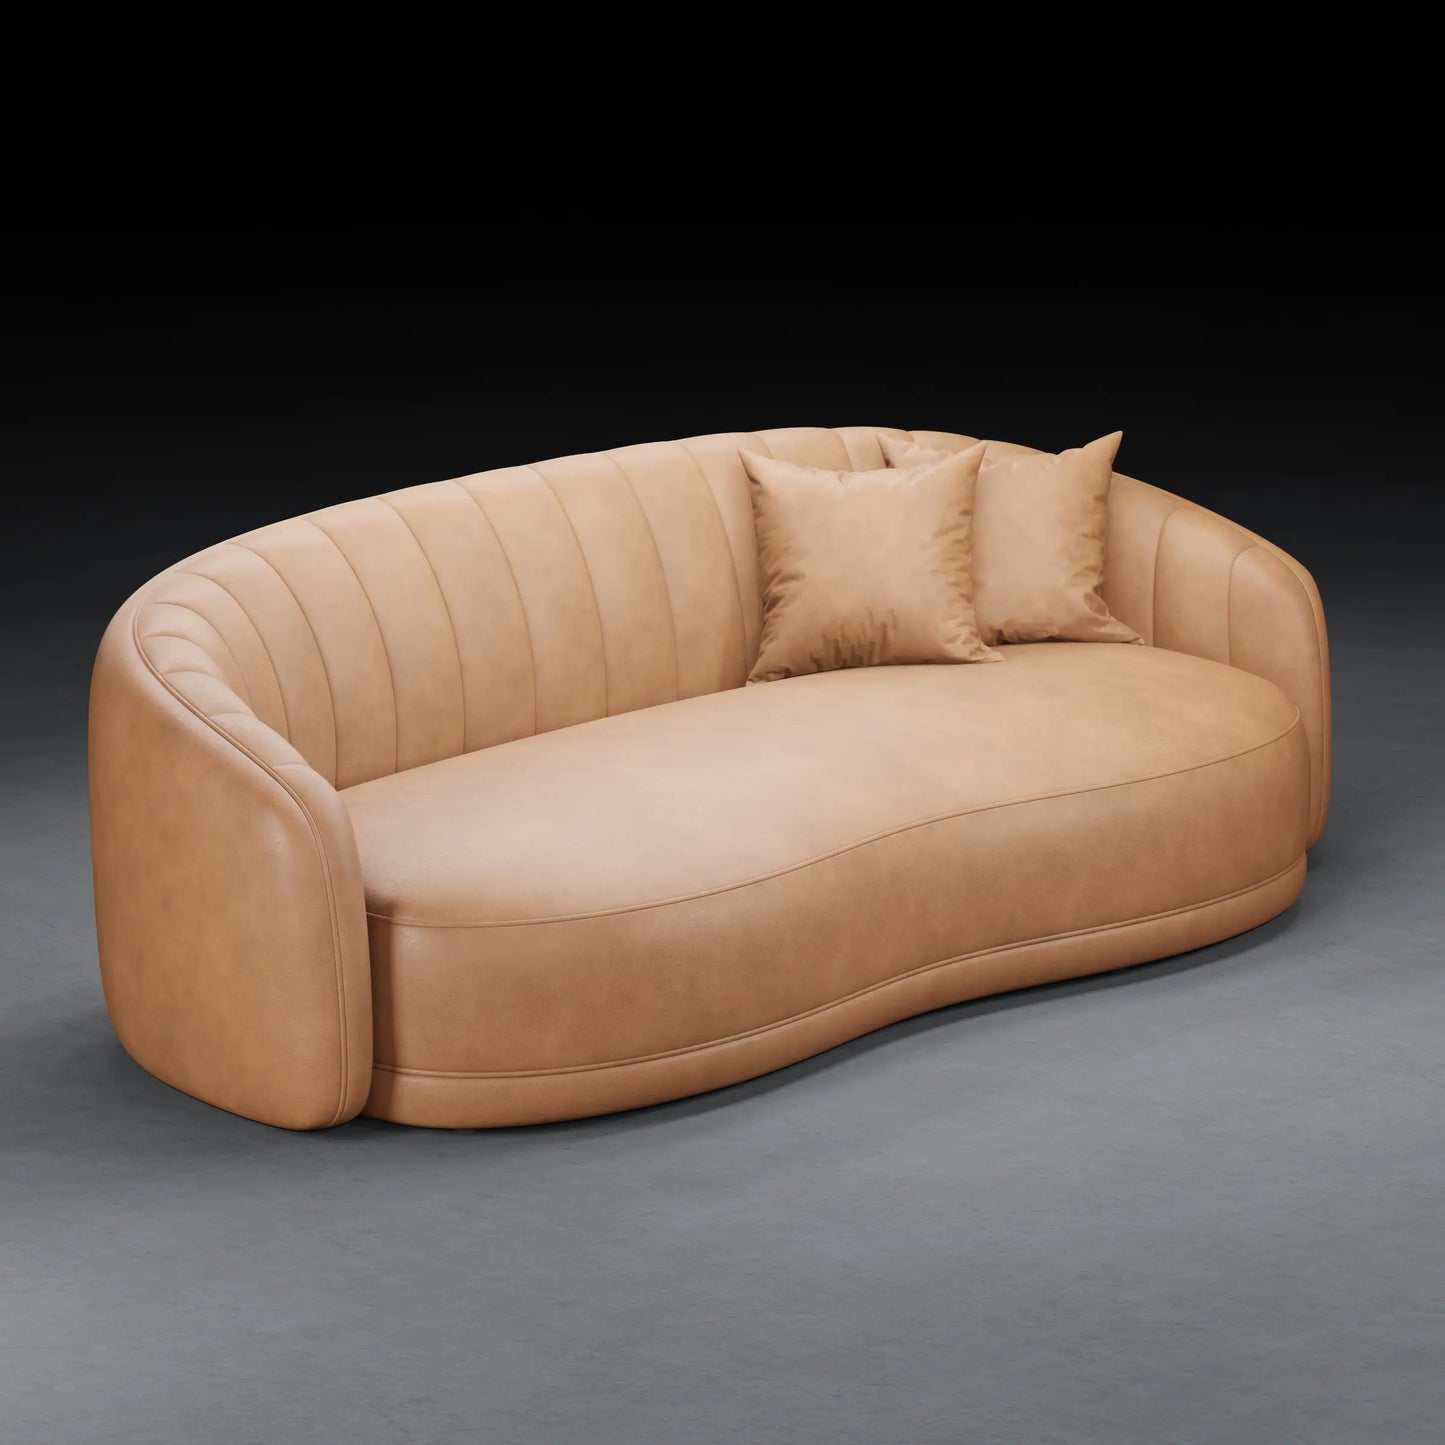 LILY - 3 Seater Couch in Leather Finish | Tan Color